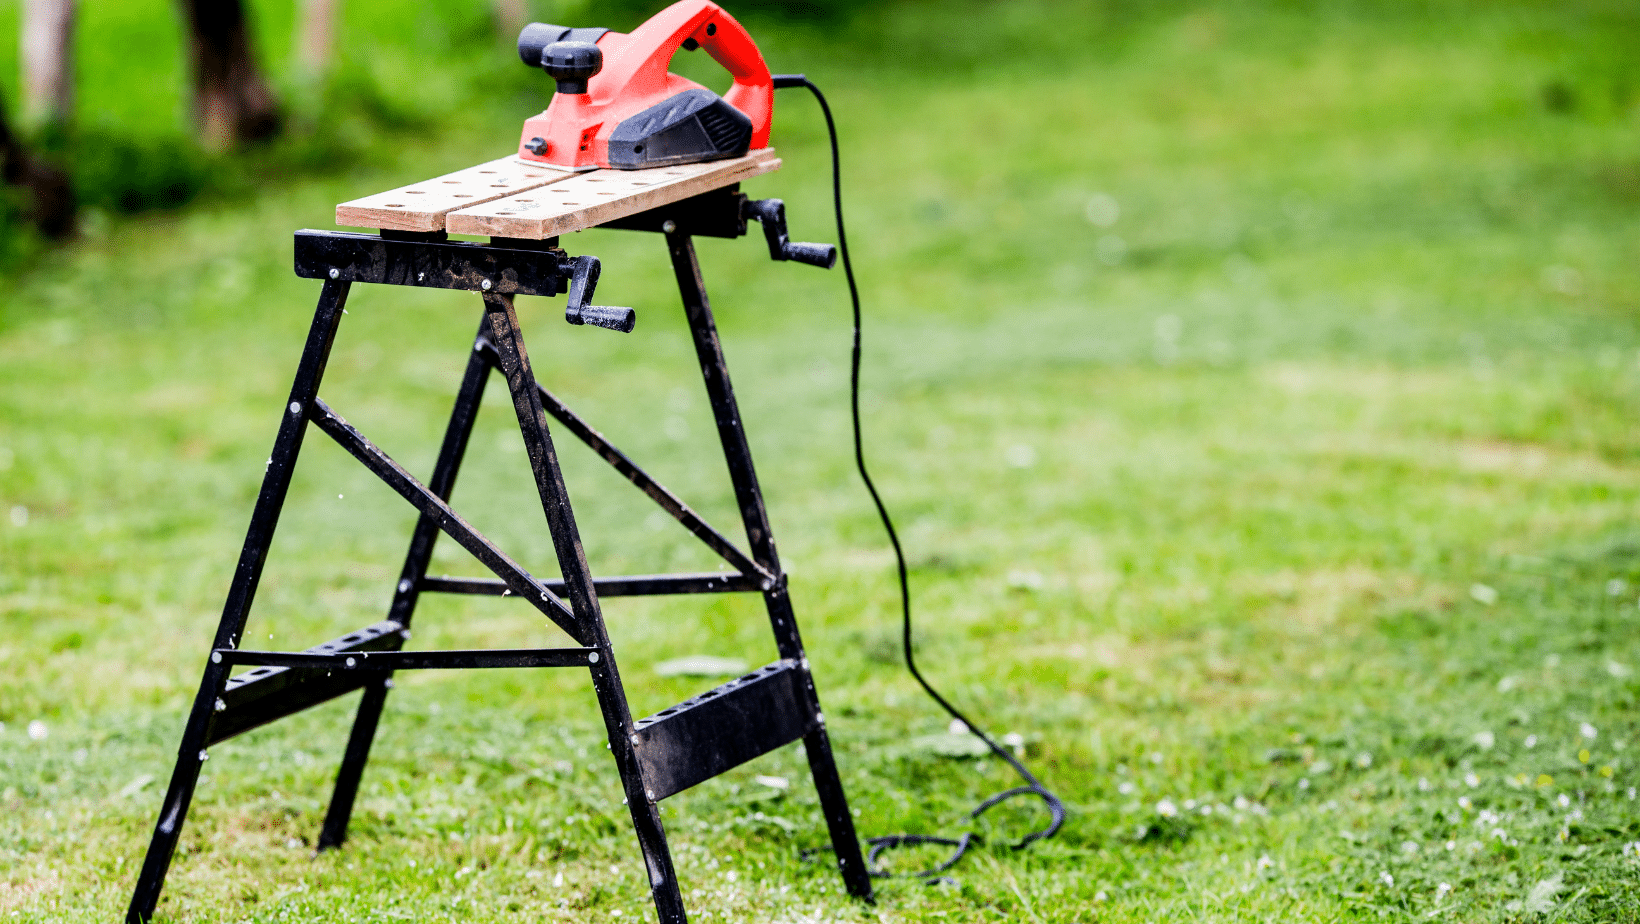 What is the best portable table saw?